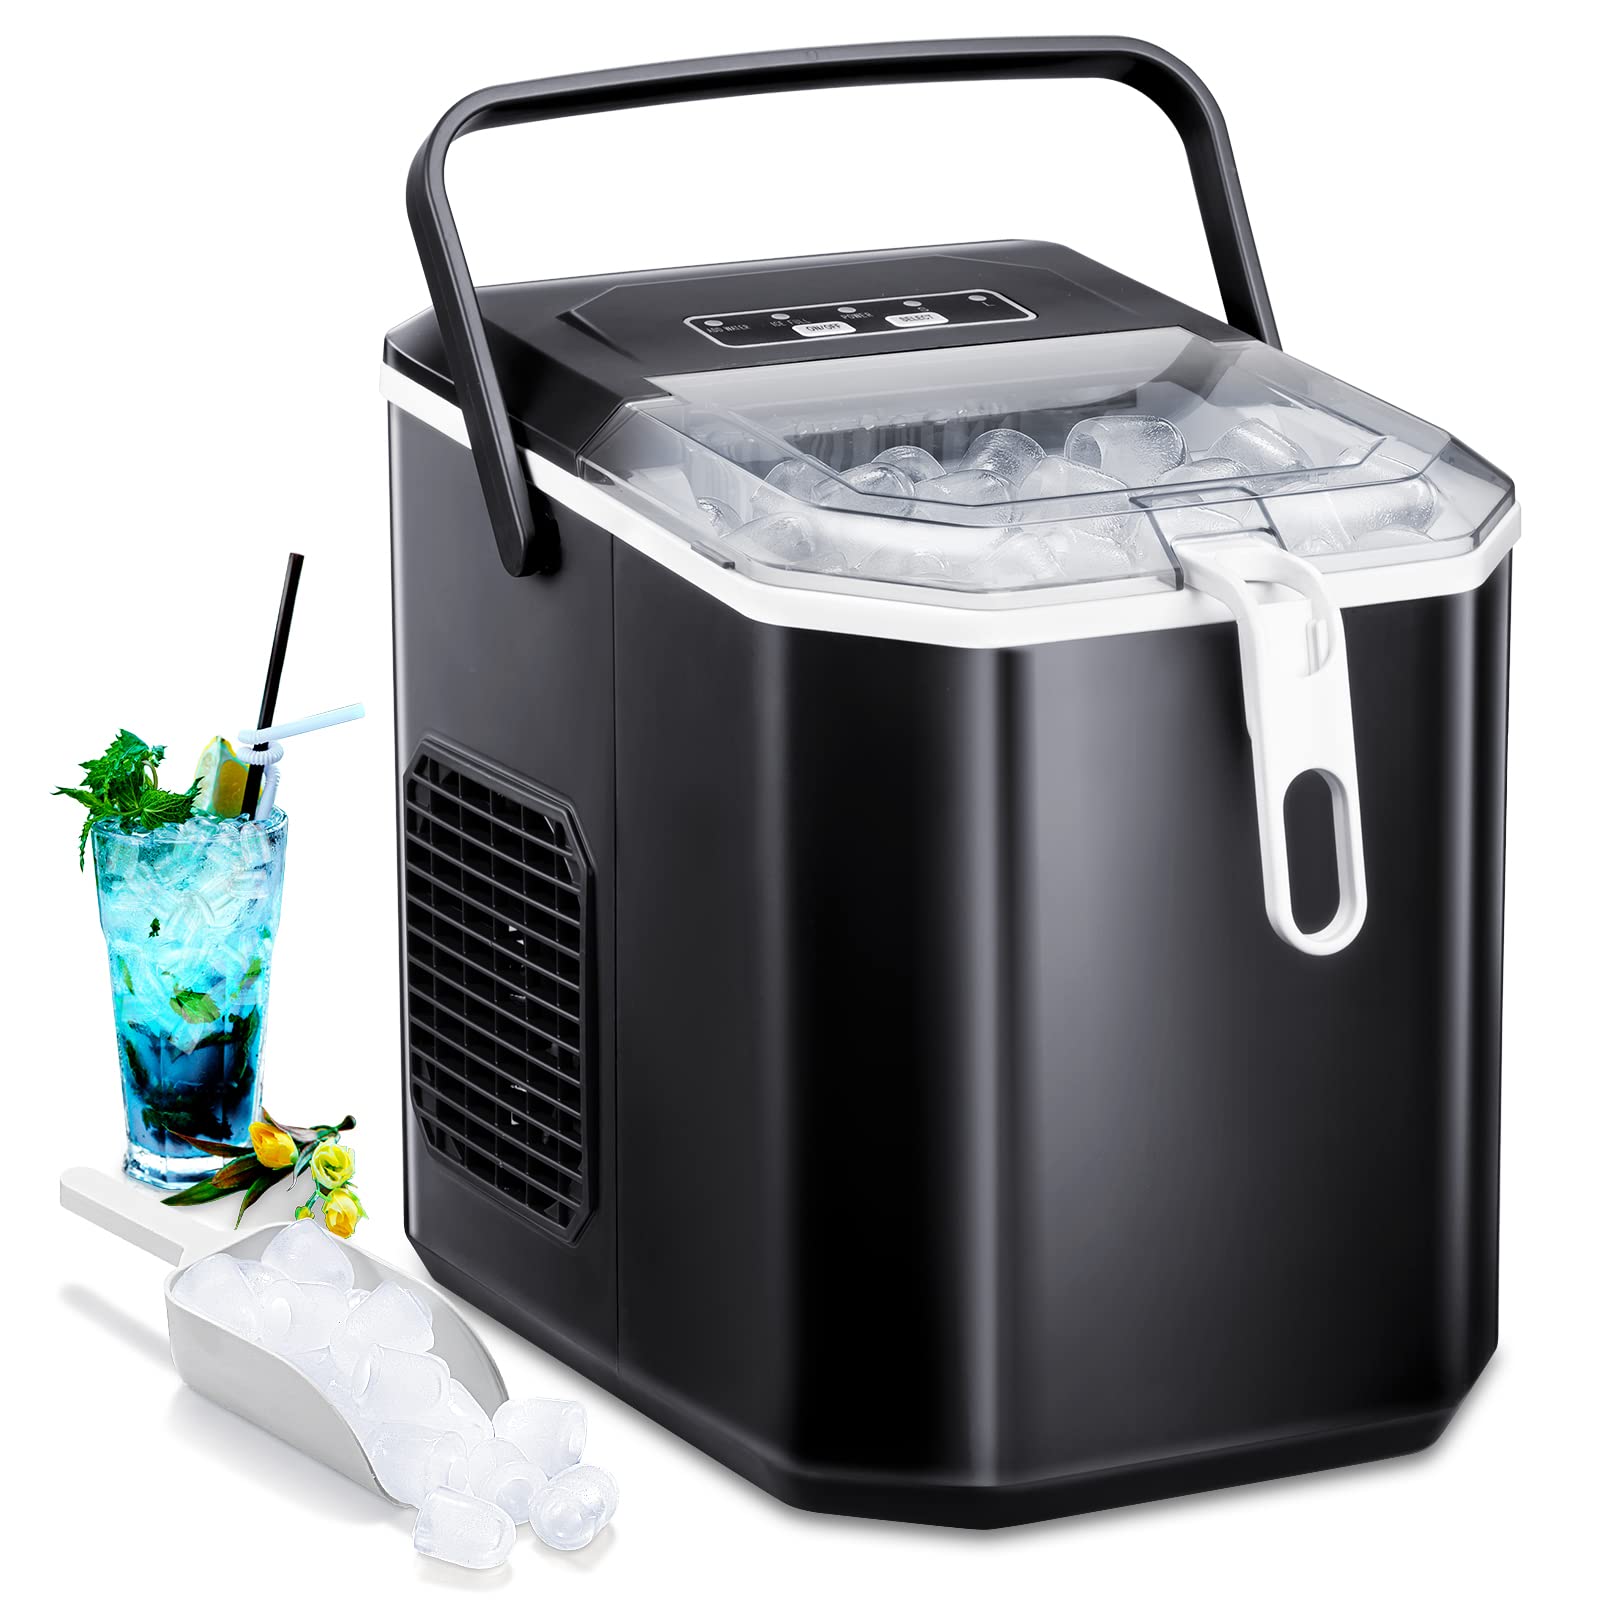  Joy Pebble V2.0 Commercial Ice Machine,100 lbs,2 Way  Filling,Self Cleaning Ice Maker,Ice Machines with 24 Hour Timer,Ice  Thickness Control,Stainless Steel Ice Makers for School,Home,Bar,RV :  Appliances